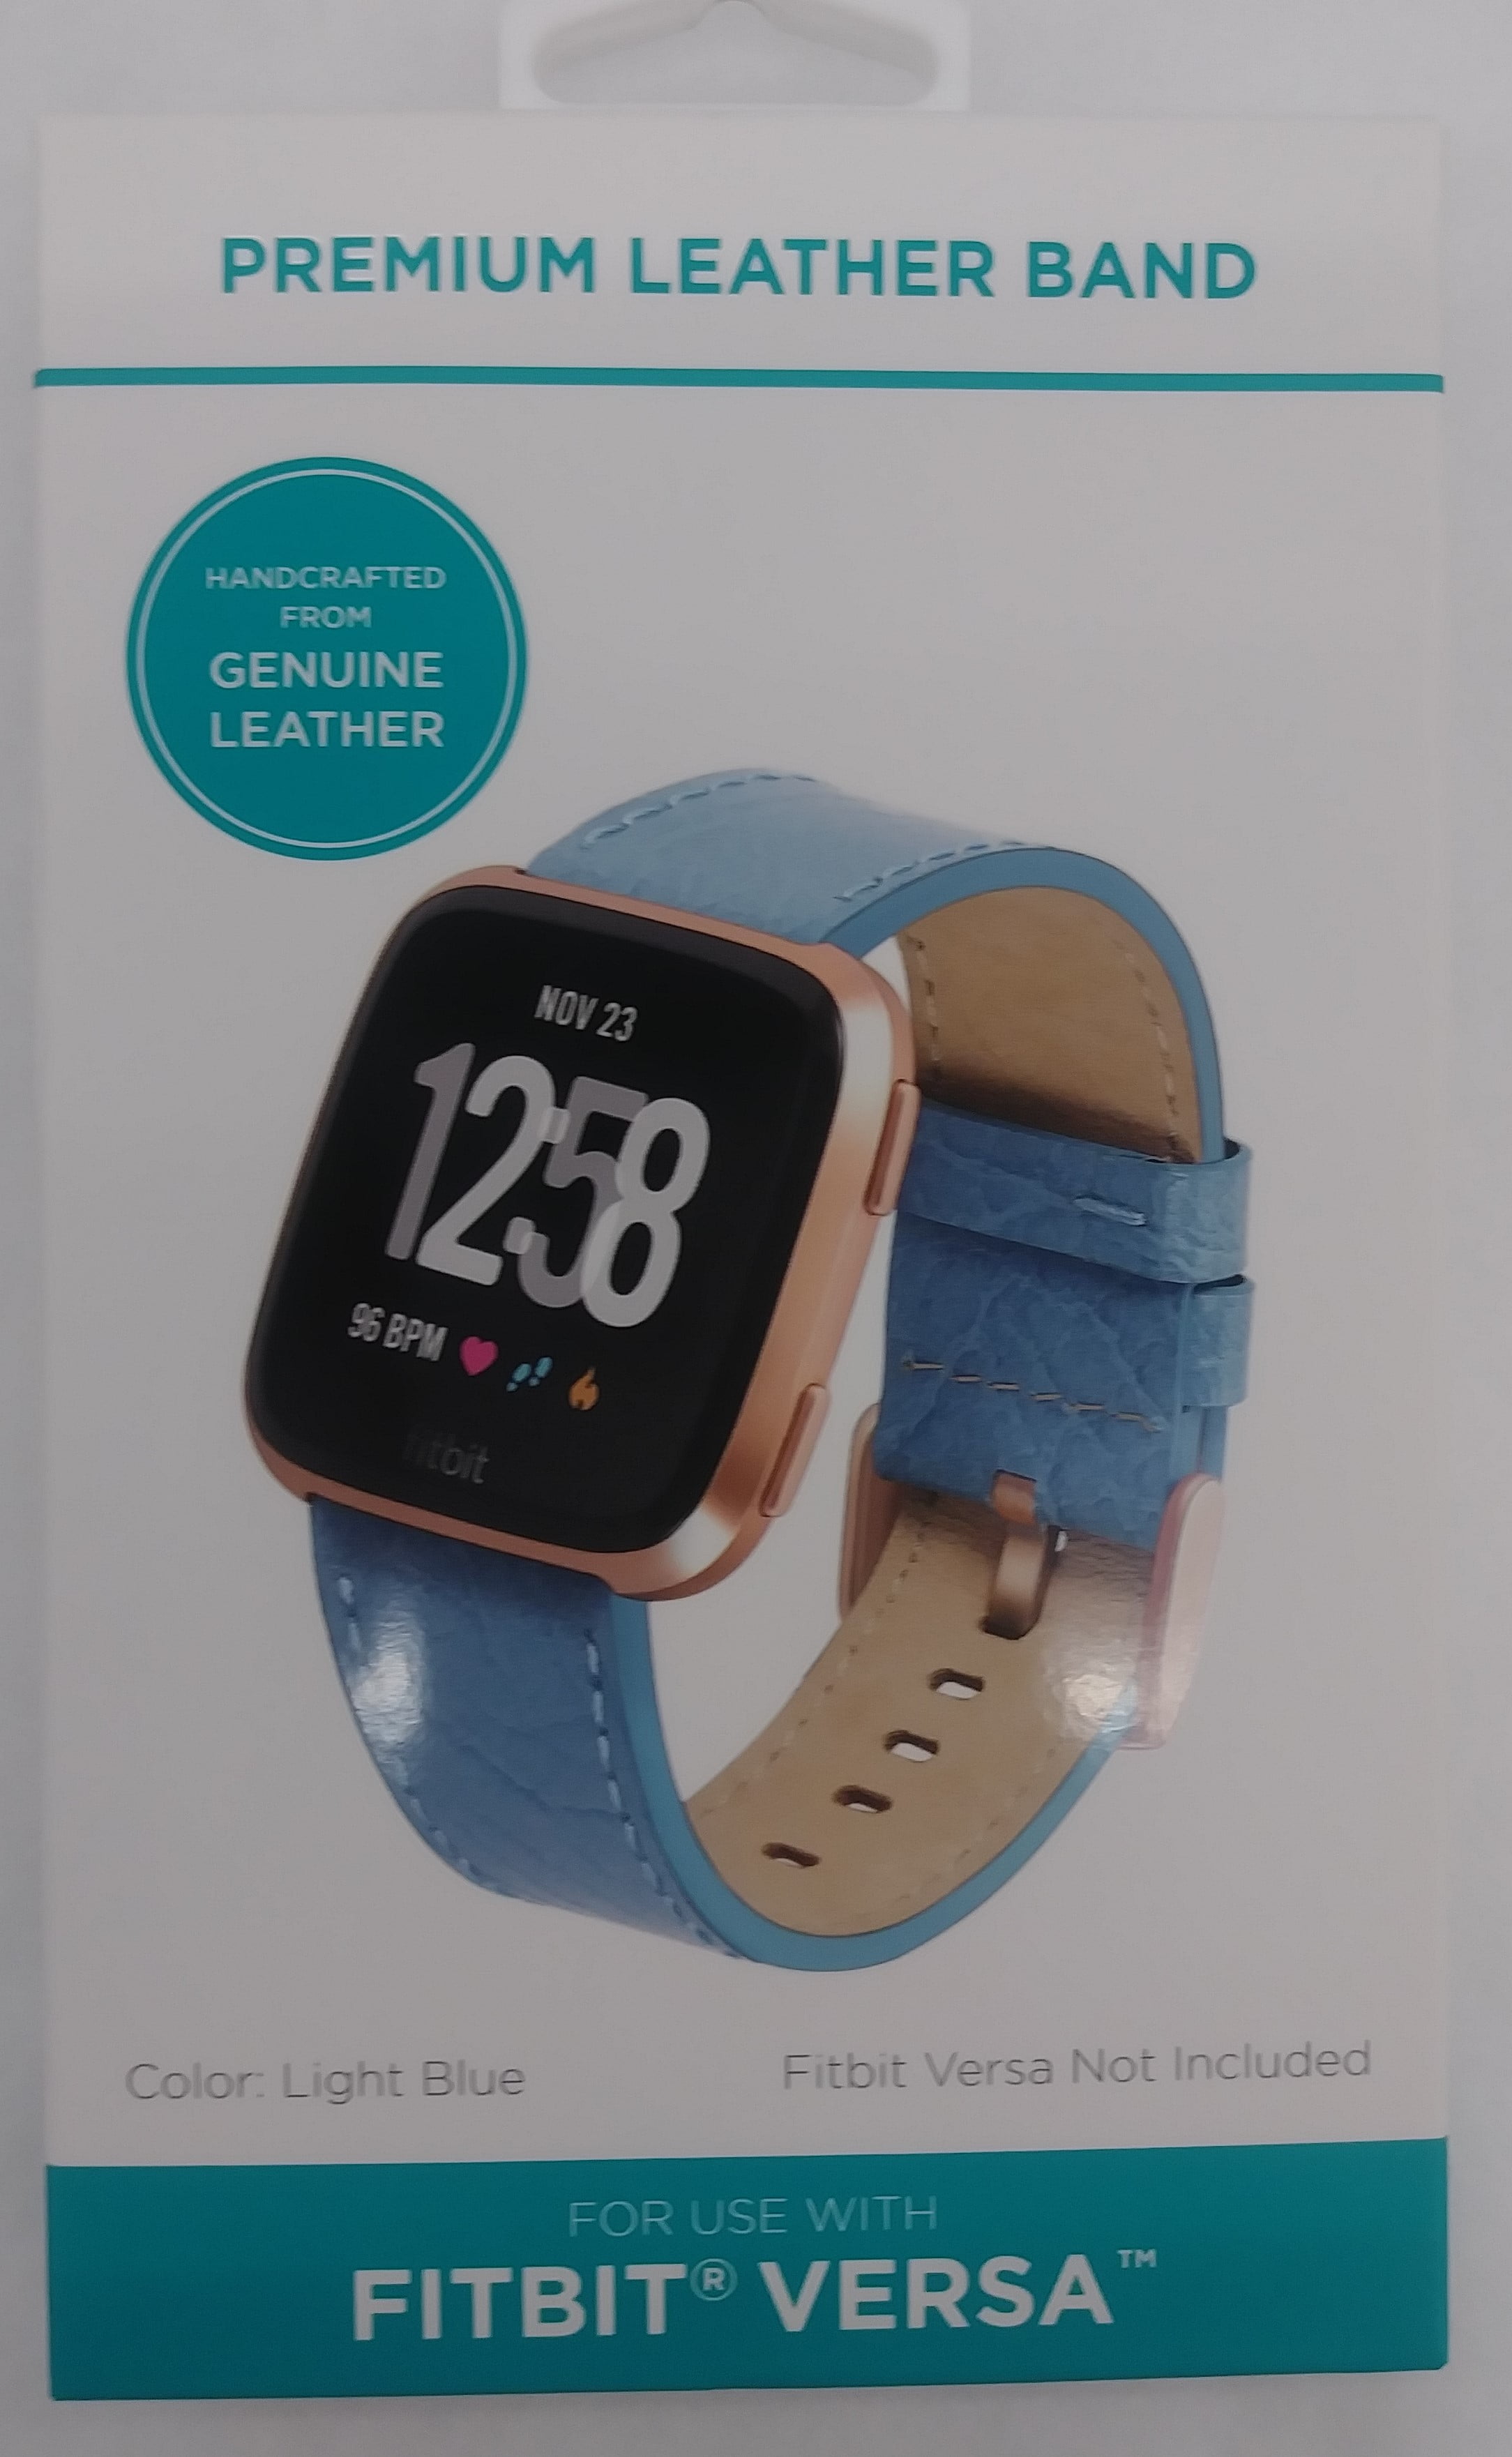 Versa - Fitbit Versa Leather Band, Teal 